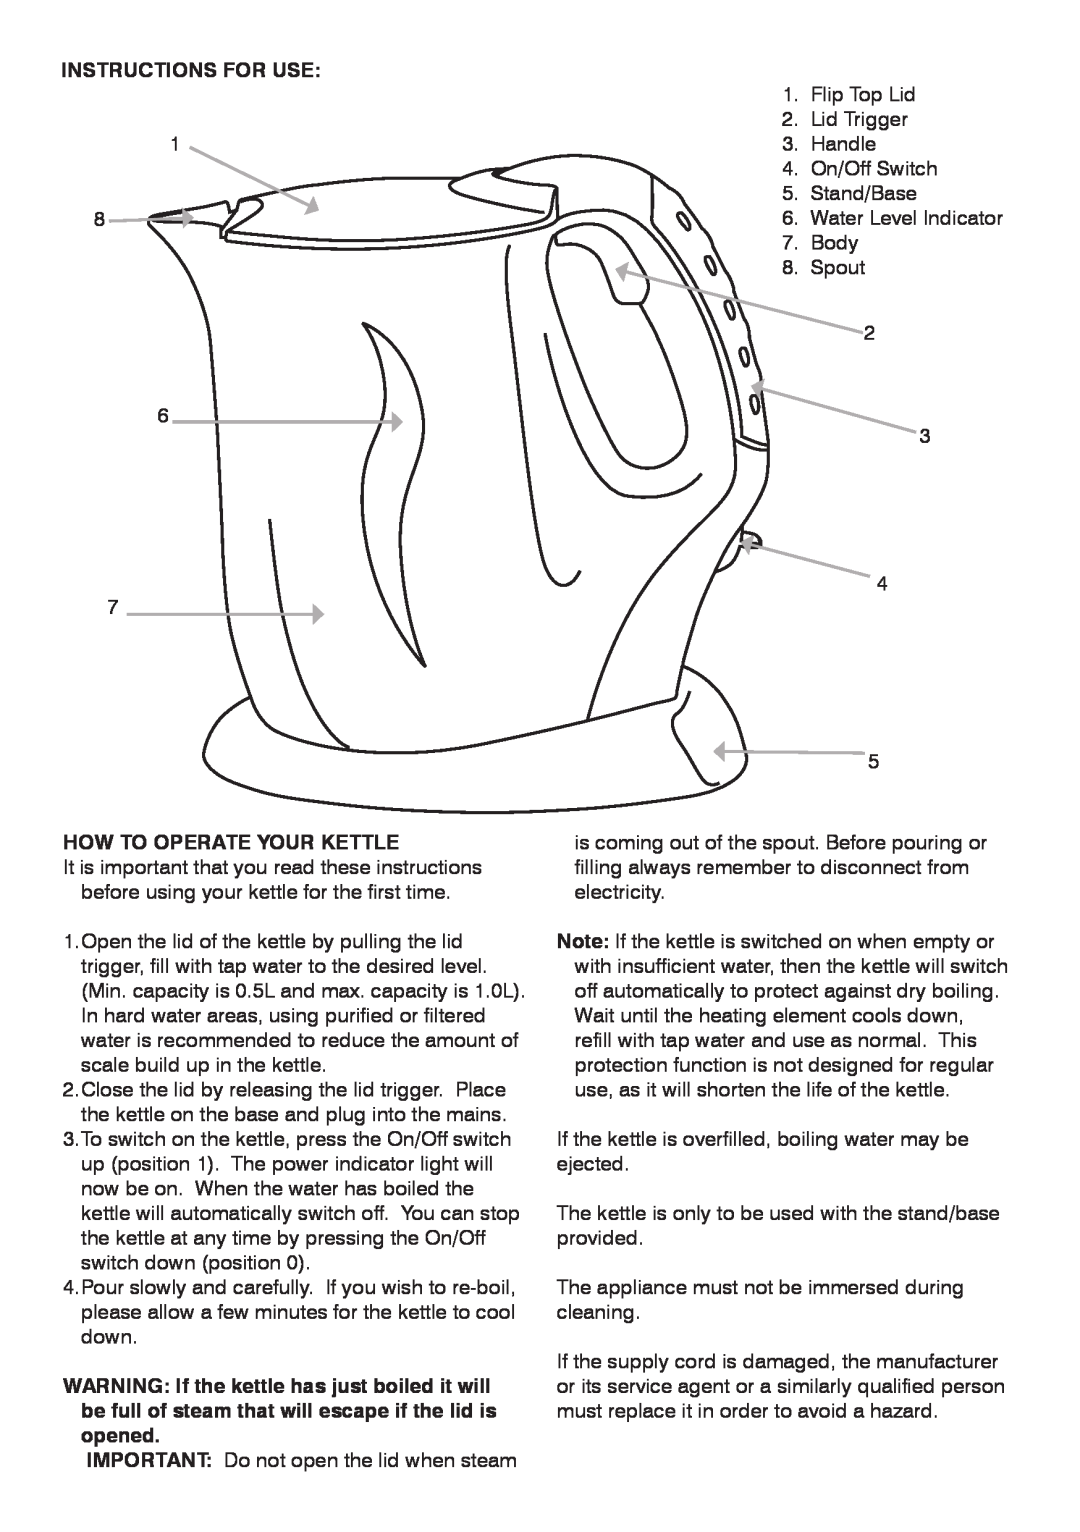 Mellerware 3 3 0 0 1, 3 3 0 0 0 manual Instructions For Use, How To Operate Your Kettle 